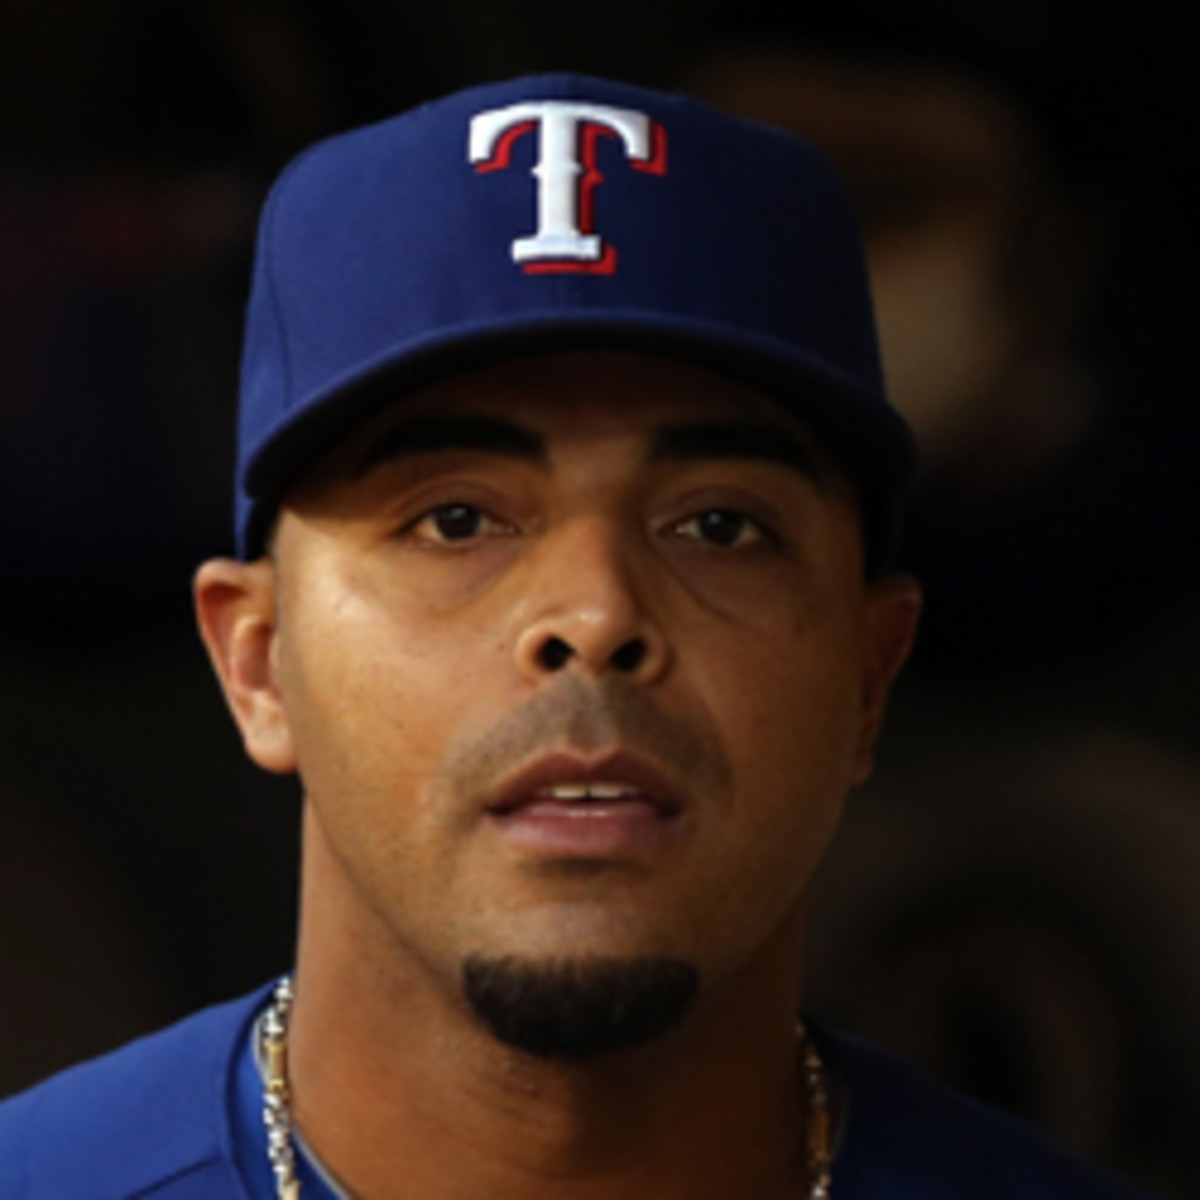 Nelson Cruz was linked to a Miami "wellness" clinic that allegedly supplied PEDs. (Ezra Shaw/Getty Images)